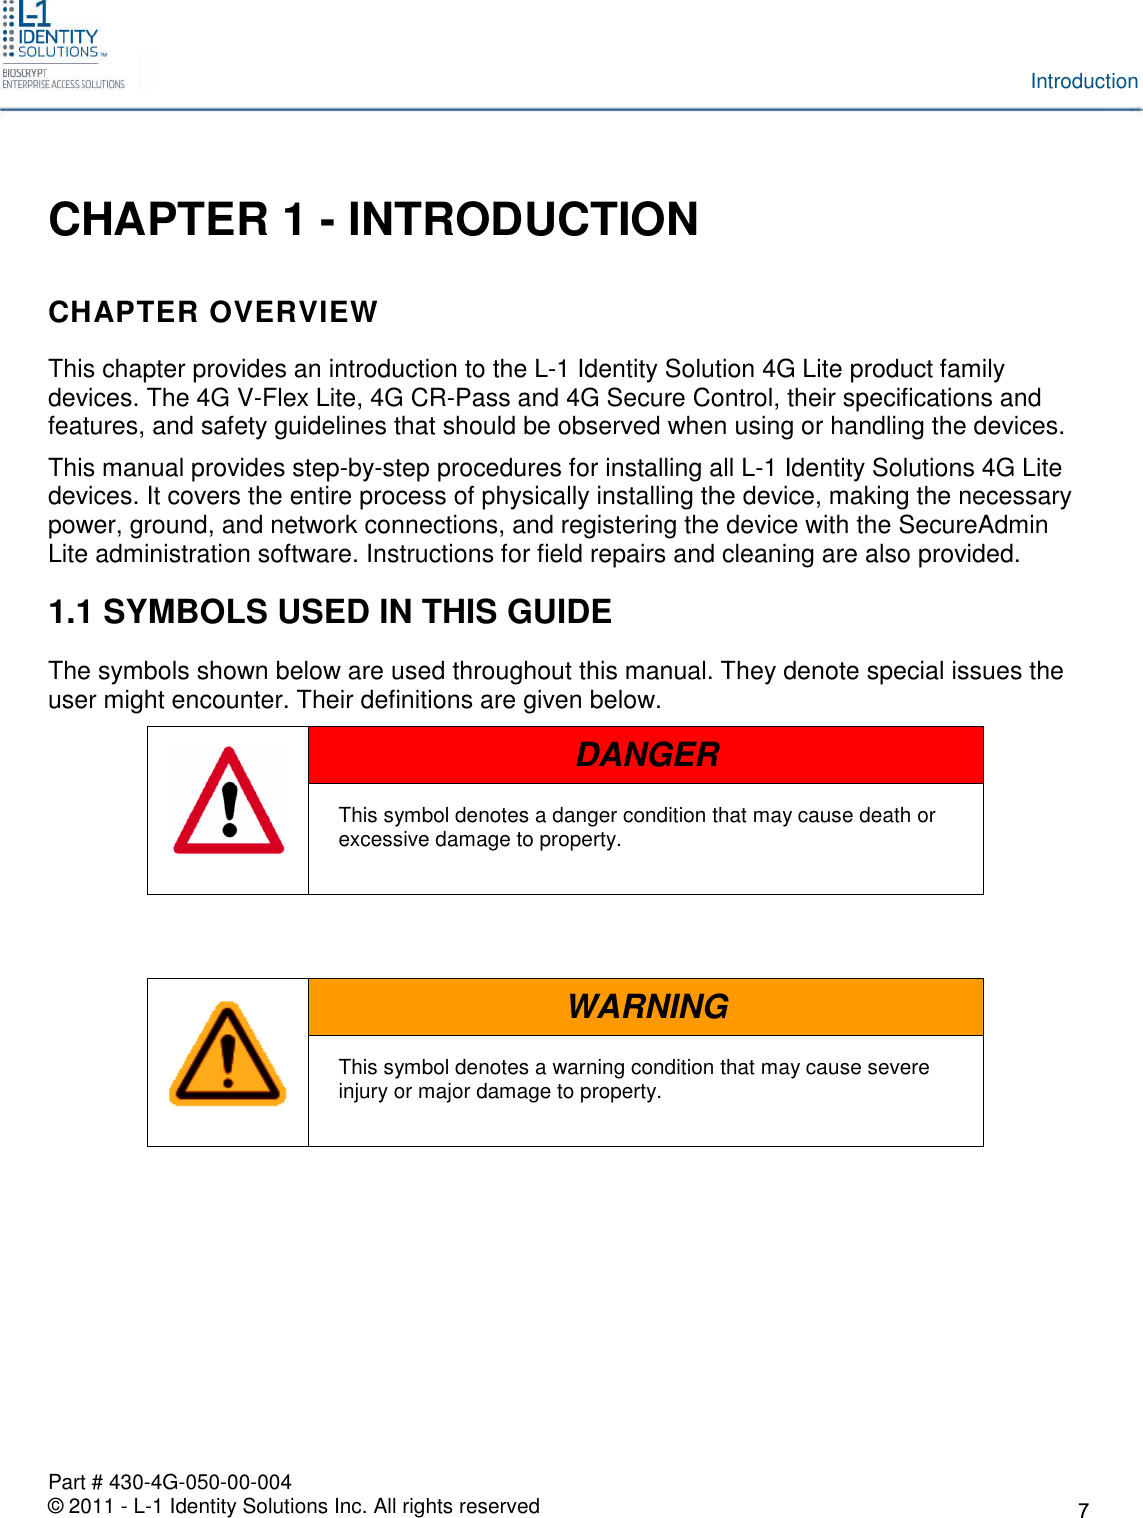 Part # 430-4G-050-00-004© 2011 - L-1 Identity Solutions Inc. All rights reservedIntroductionCHAPTER 1 - INTRODUCTIONCHAPTER OVERVIEWThis chapter provides an introduction to the L-1 Identity Solution 4G Lite product familydevices. The 4G V-Flex Lite, 4G CR-Pass and 4G Secure Control, their specifications andfeatures, and safety guidelines that should be observed when using or handling the devices.This manual provides step-by-step procedures for installing all L-1 Identity Solutions 4G Litedevices. It covers the entire process of physically installing the device, making the necessarypower, ground, and network connections, and registering the device with the SecureAdminLite administration software. Instructions for field repairs and cleaning are also provided.1.1 SYMBOLS USED IN THIS GUIDEThe symbols shown below are used throughout this manual. They denote special issues theuser might encounter. Their definitions are given below.DANGERThis symbol denotes a danger condition that may cause death orexcessive damage to property.WARNINGThis symbol denotes a warning condition that may cause severeinjury or major damage to property.